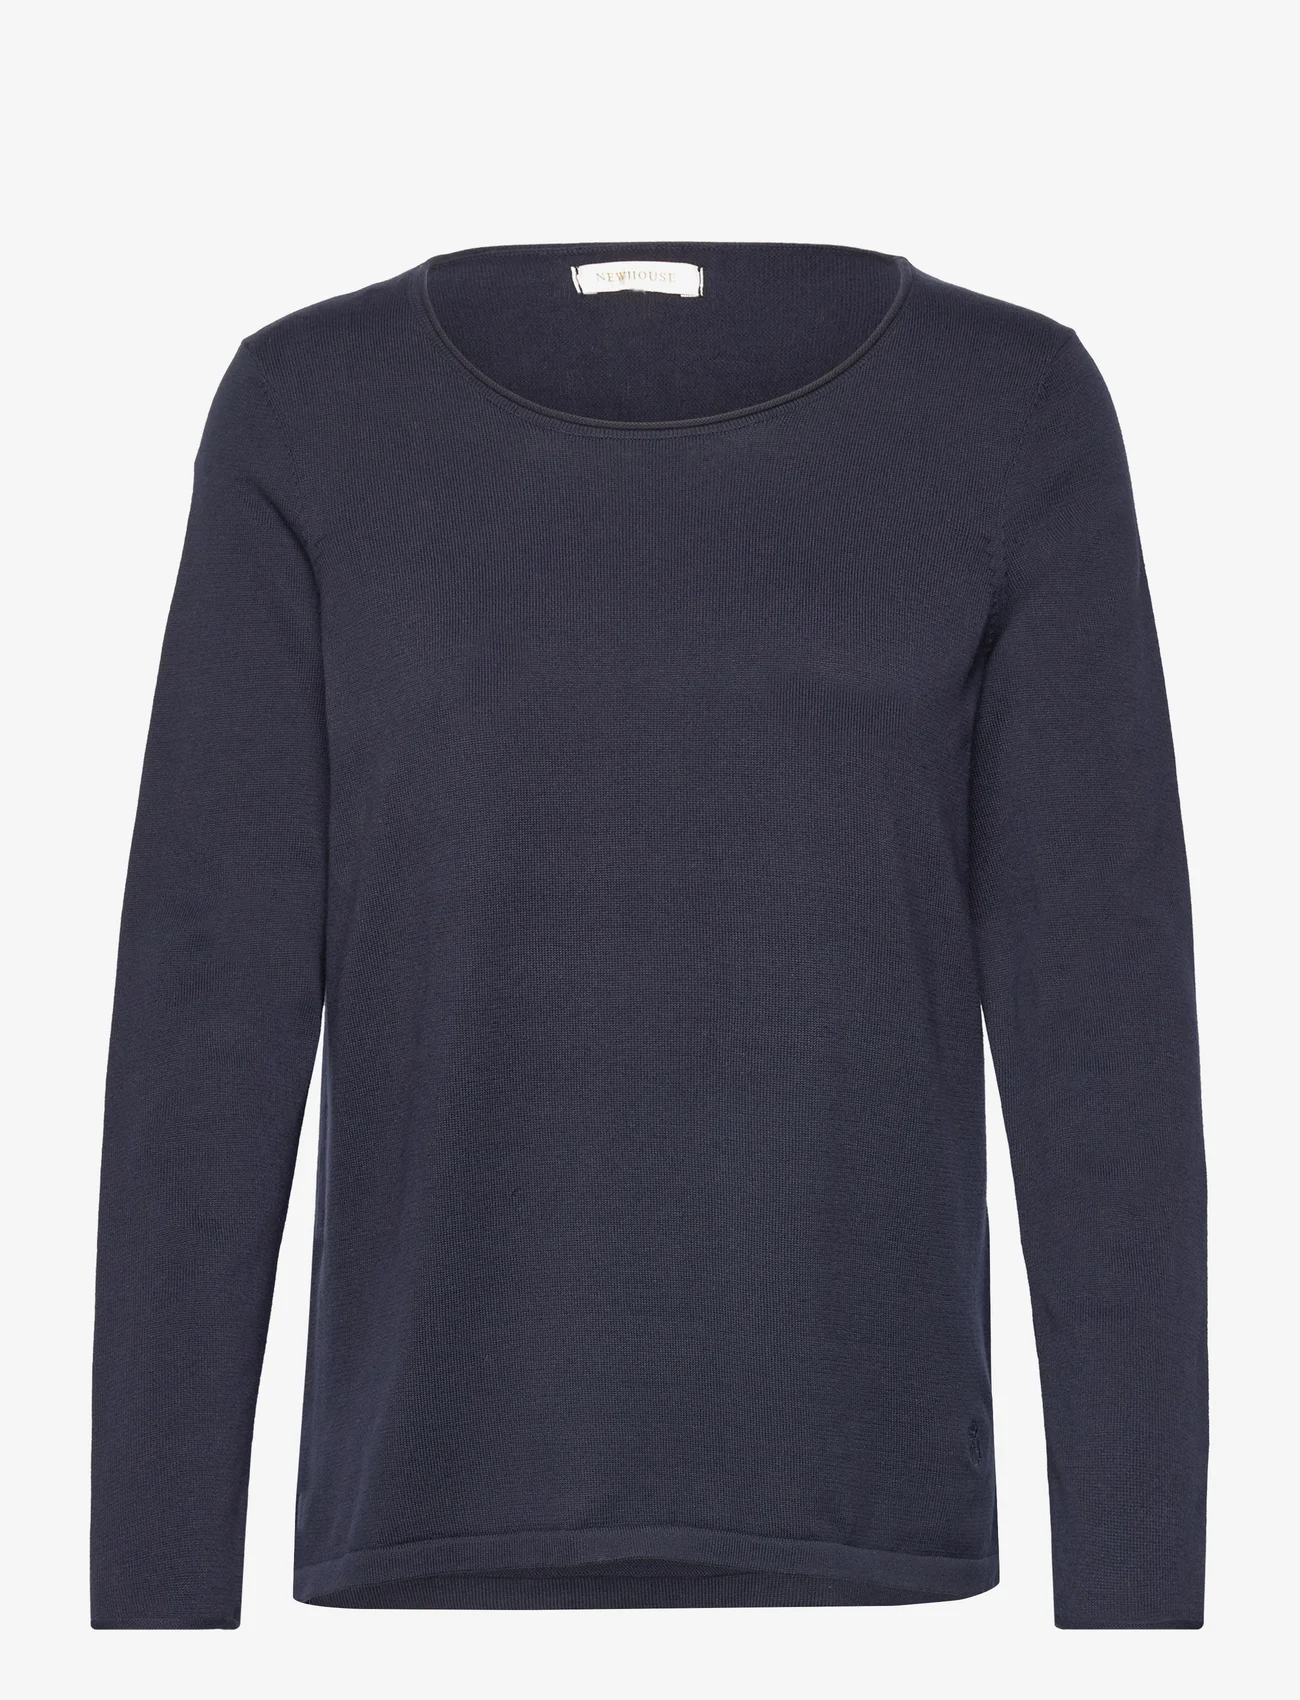 Newhouse - Ebba Sweater - pullover - navy - 0